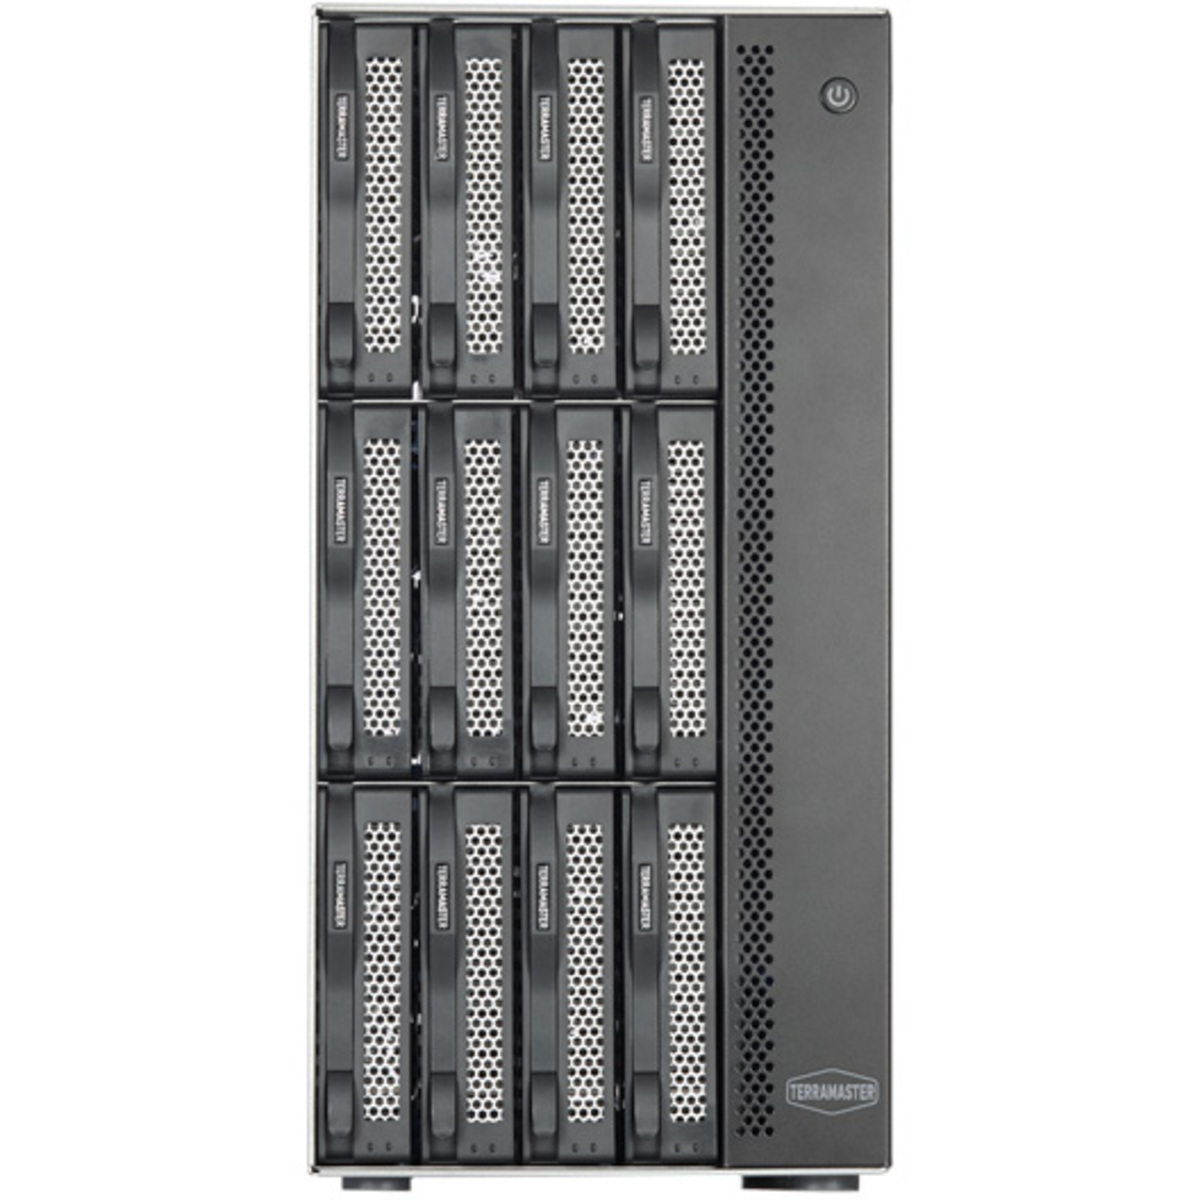 TerraMaster T12-423 154tb 12-Bay Desktop Multimedia / Power User / Business NAS - Network Attached Storage Device 7x22tb Seagate EXOS X22 ST22000NM001E 3.5 7200rpm SATA 6Gb/s HDD ENTERPRISE Class Drives Installed - Burn-In Tested T12-423